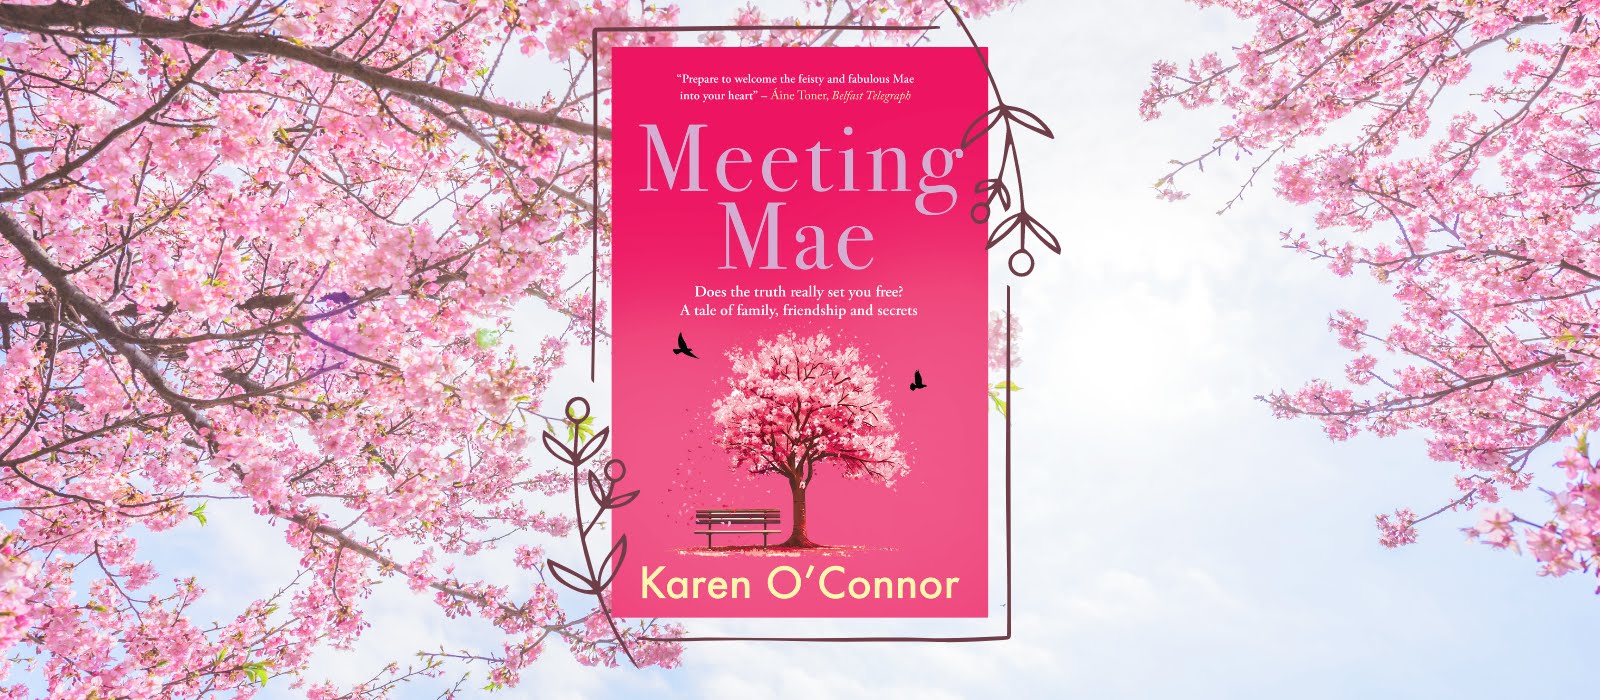 Read an extract from Karen O’Connor’s upcoming title, Meeting Mae